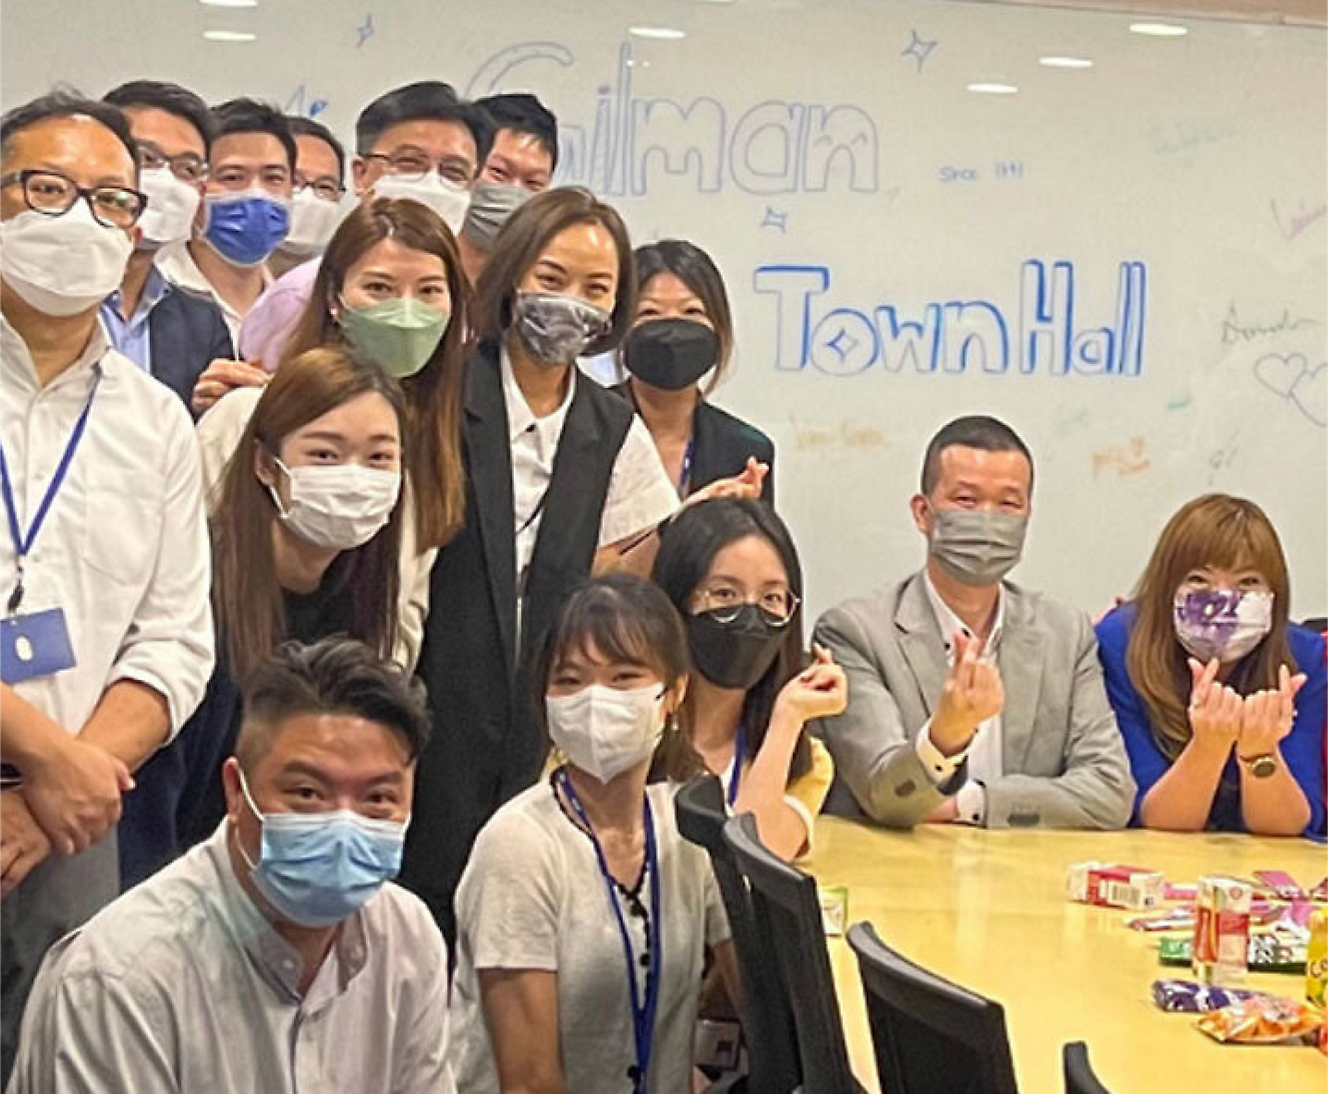 A group of people posing for a photo wearing face masks.